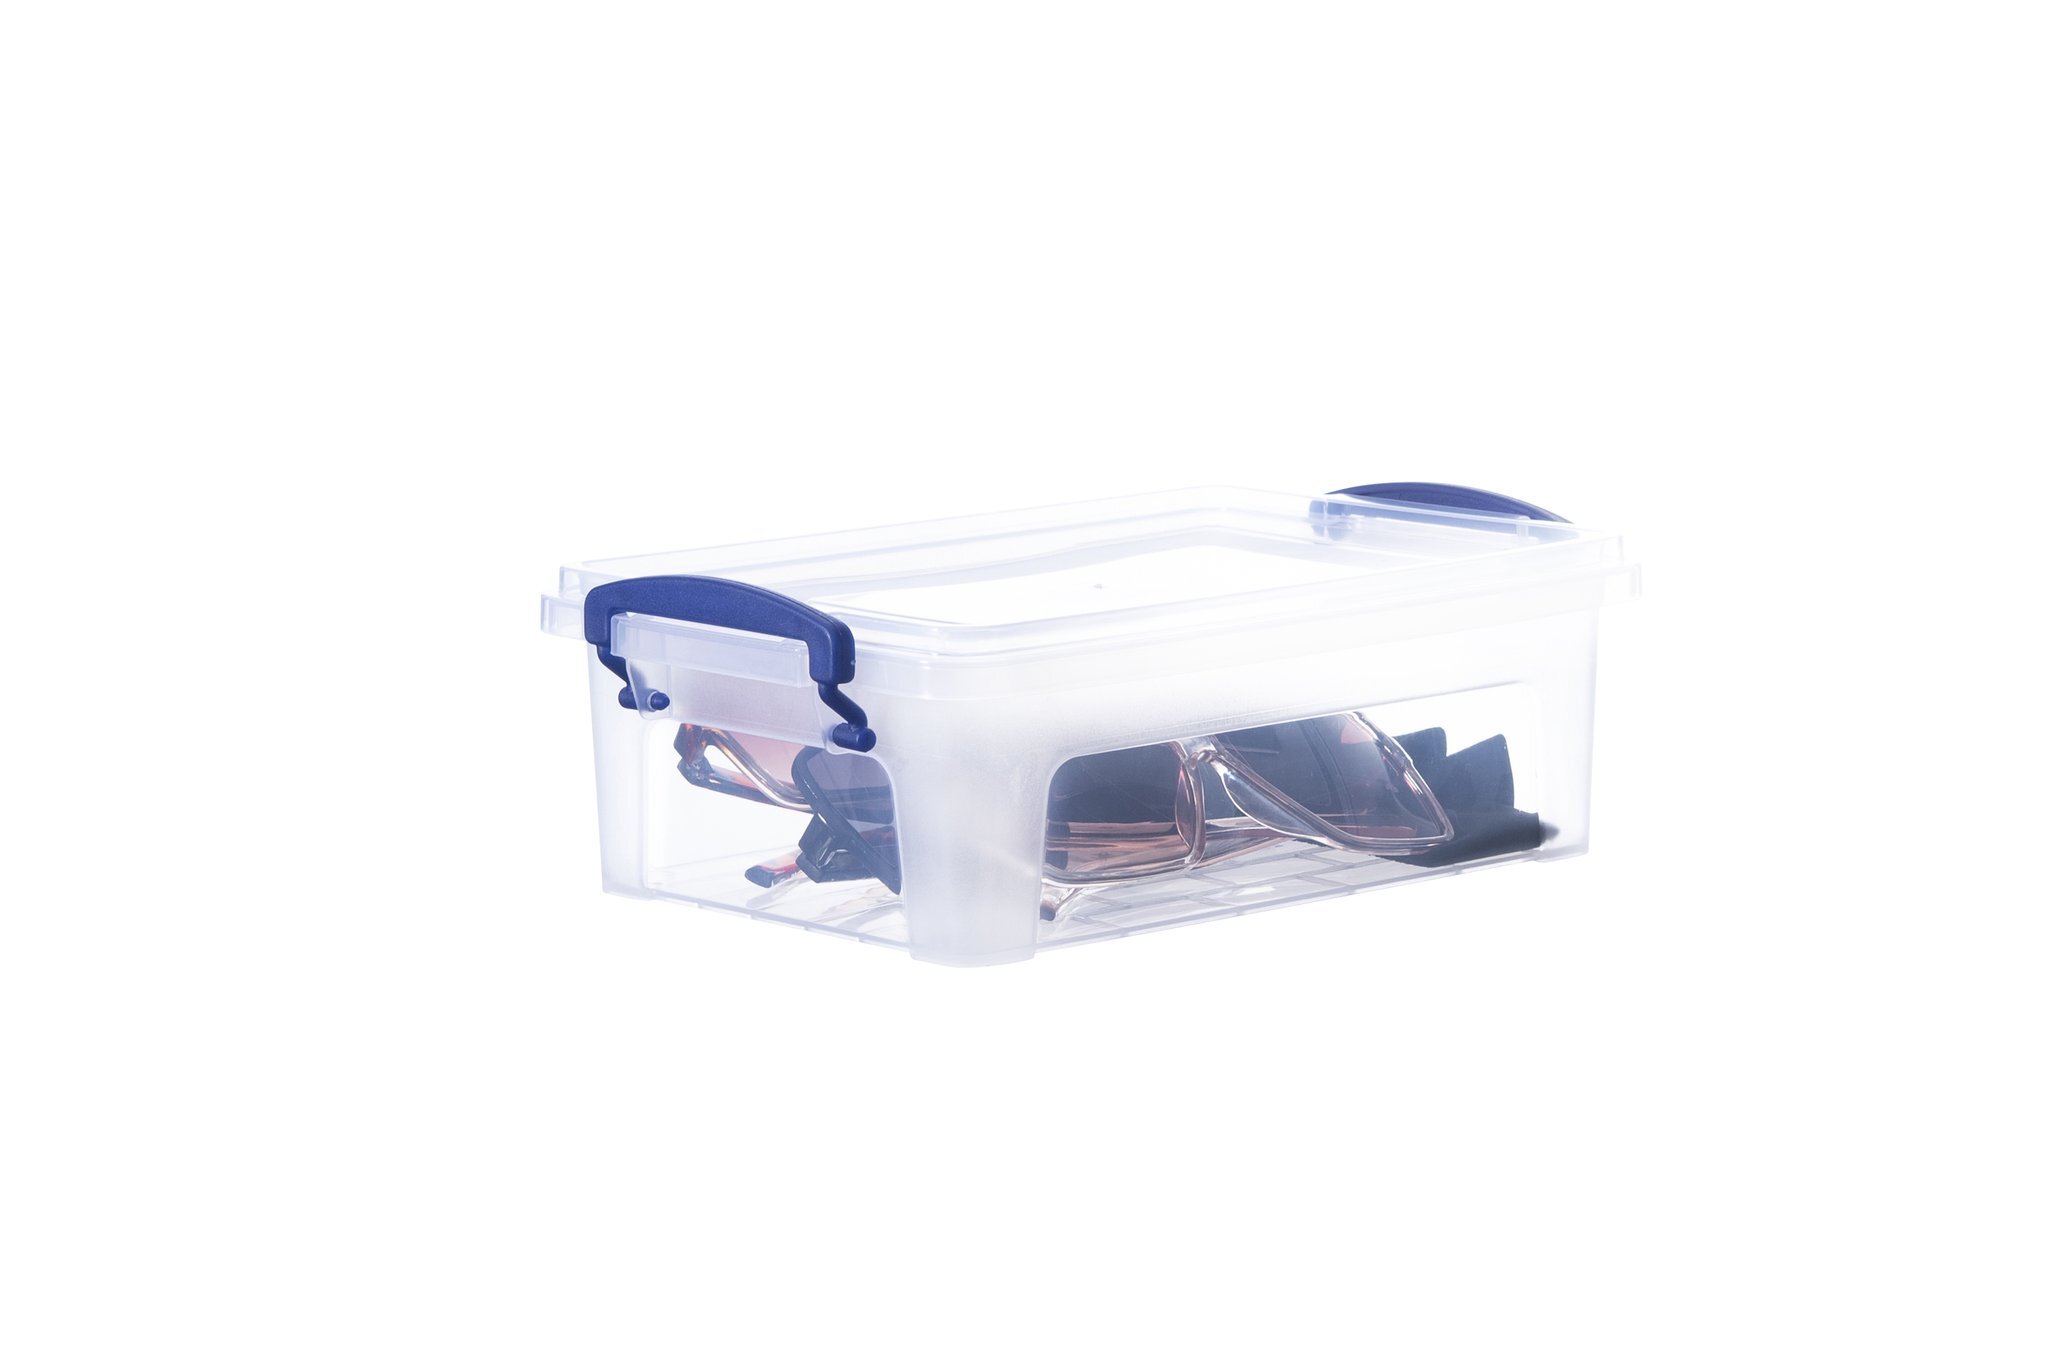  Superio Clear Storage Box with Lid, Plastic Container